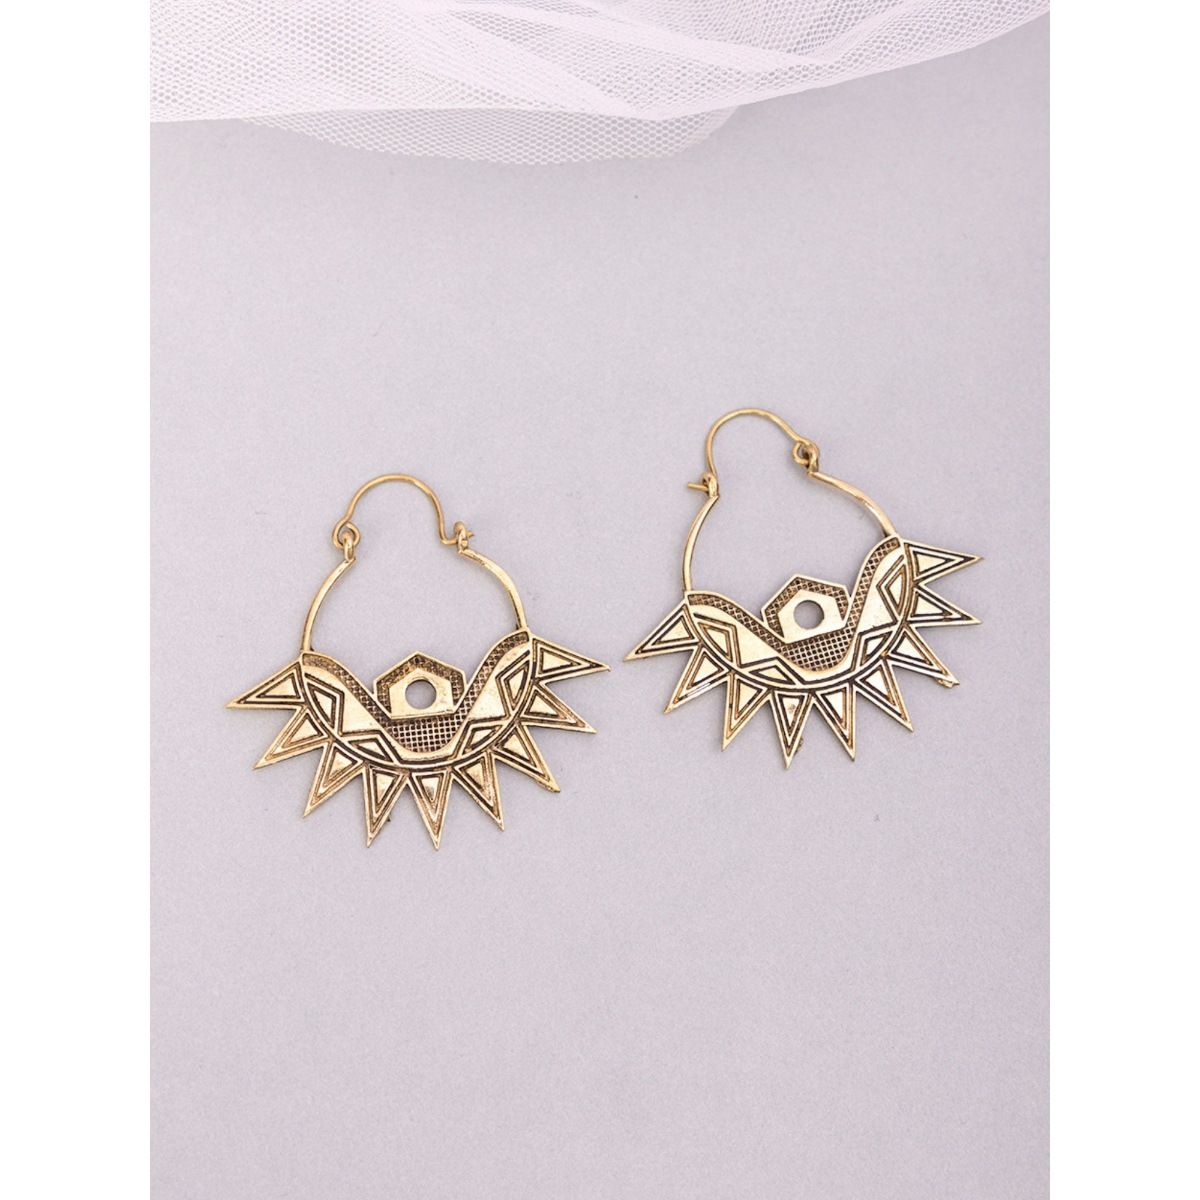 Woven Art Latest Collection of Long Silver Earrings Online For Women Girls   Amazonin जवलर